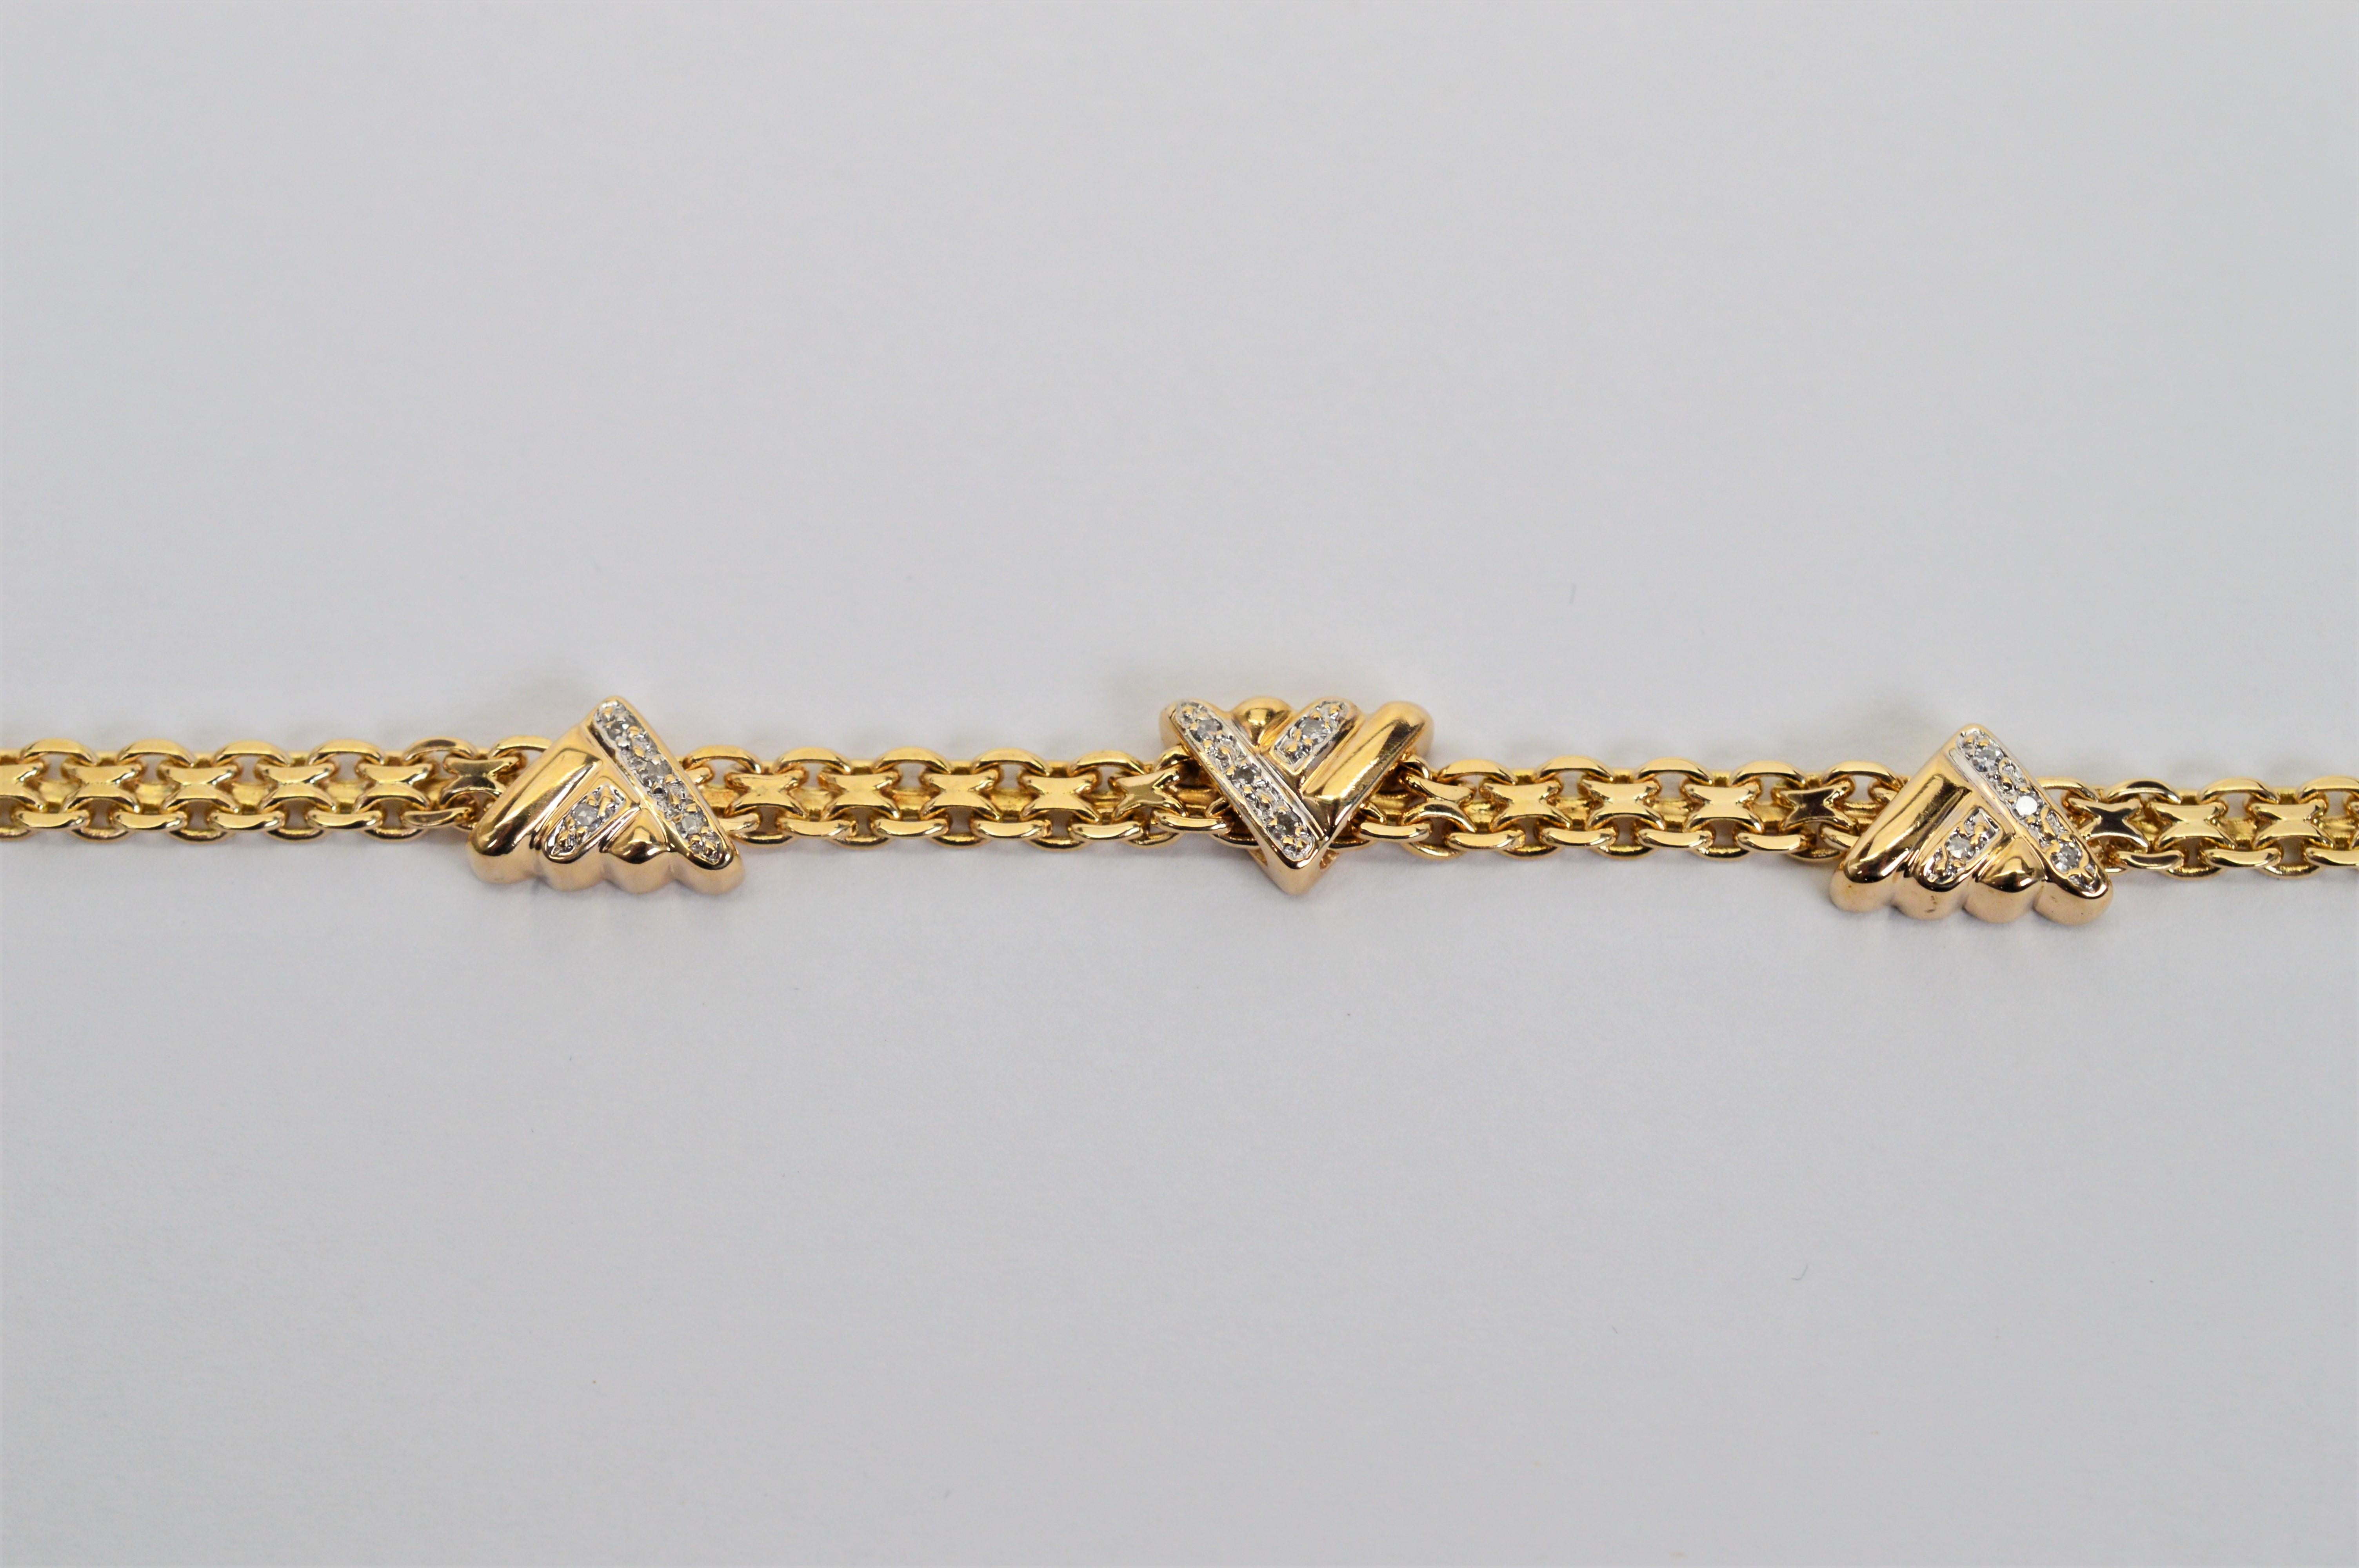 Diamond Station 14 Karat Yellow Gold Bismark Chain Bracelet In Excellent Condition For Sale In Mount Kisco, NY